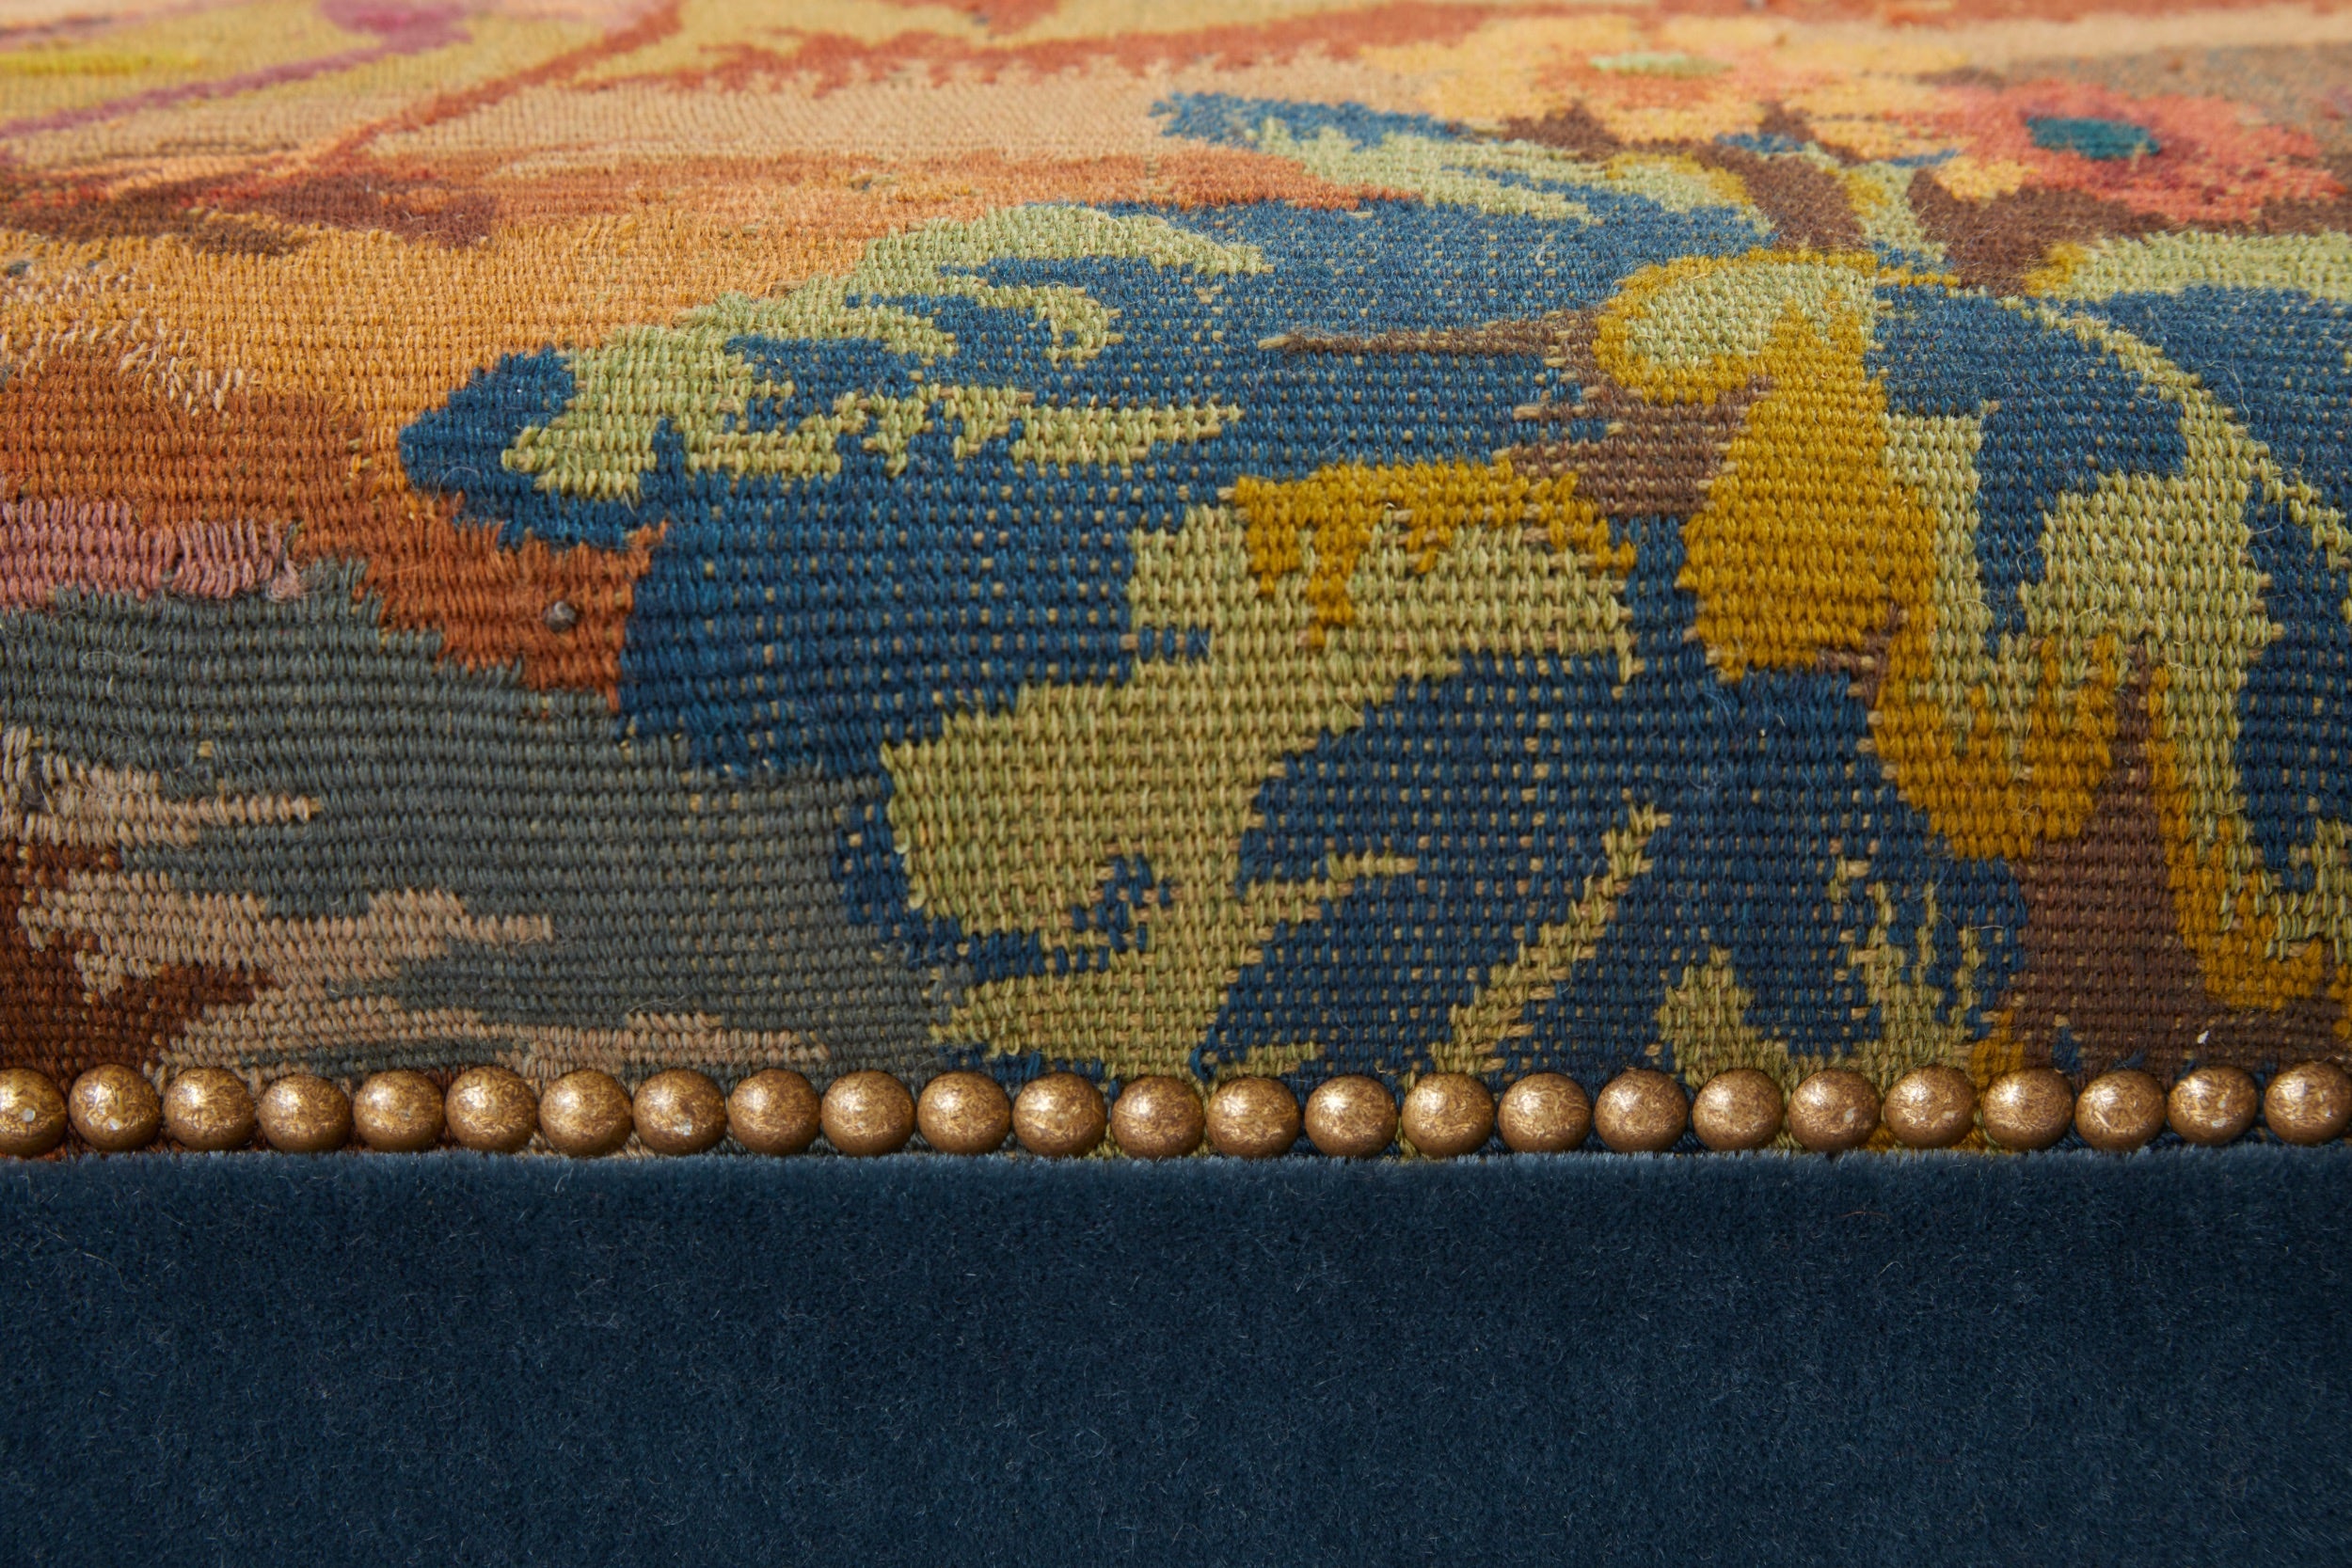 A Bespoke Upholstered Ottoman with a 19th Century English Needlework Top